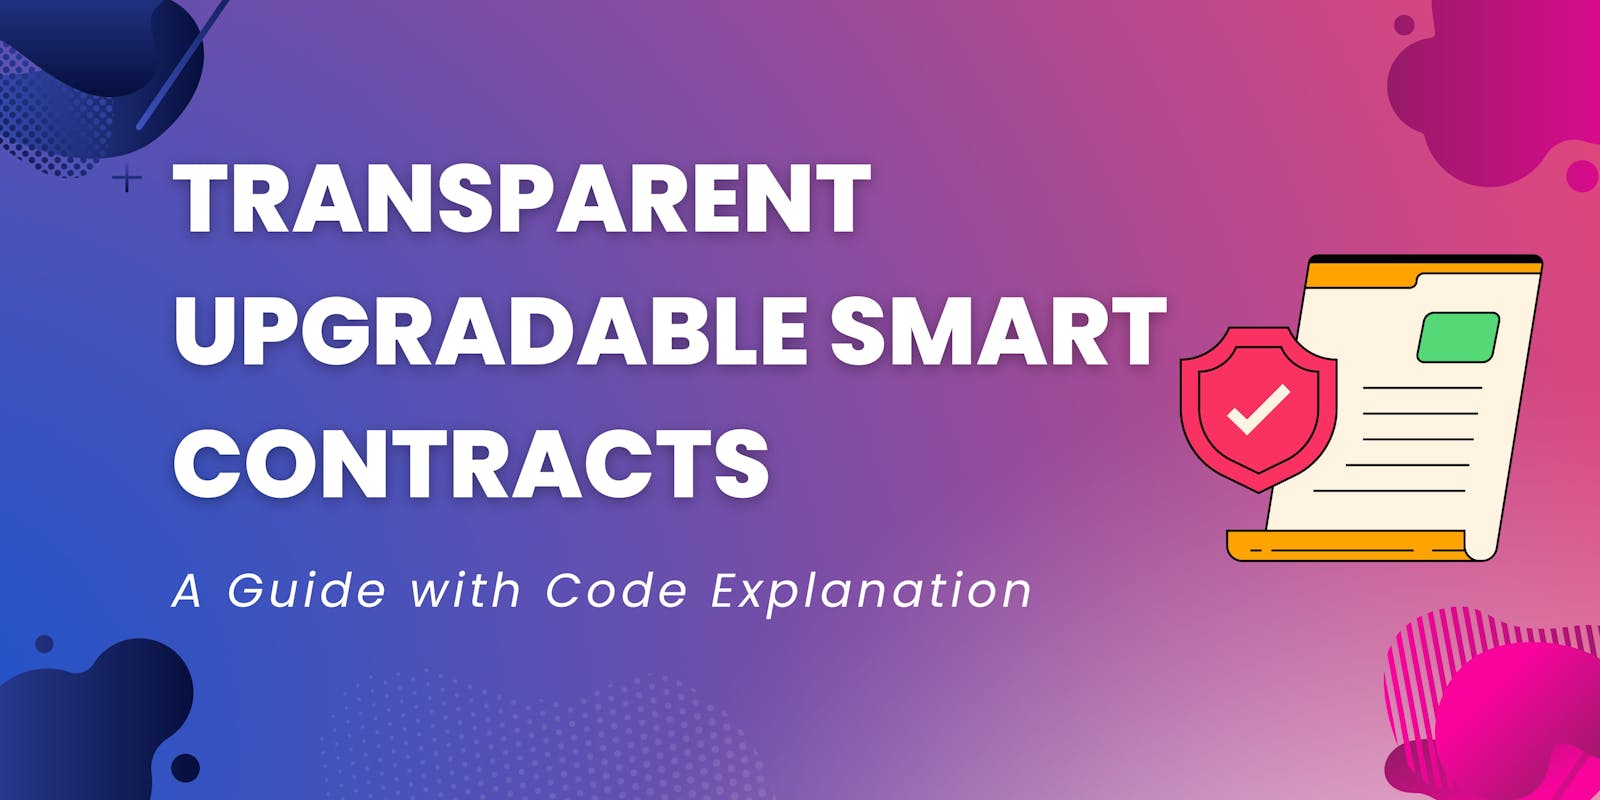 Transparent Upgradable Smart Contracts: A Guide with Code Explanation